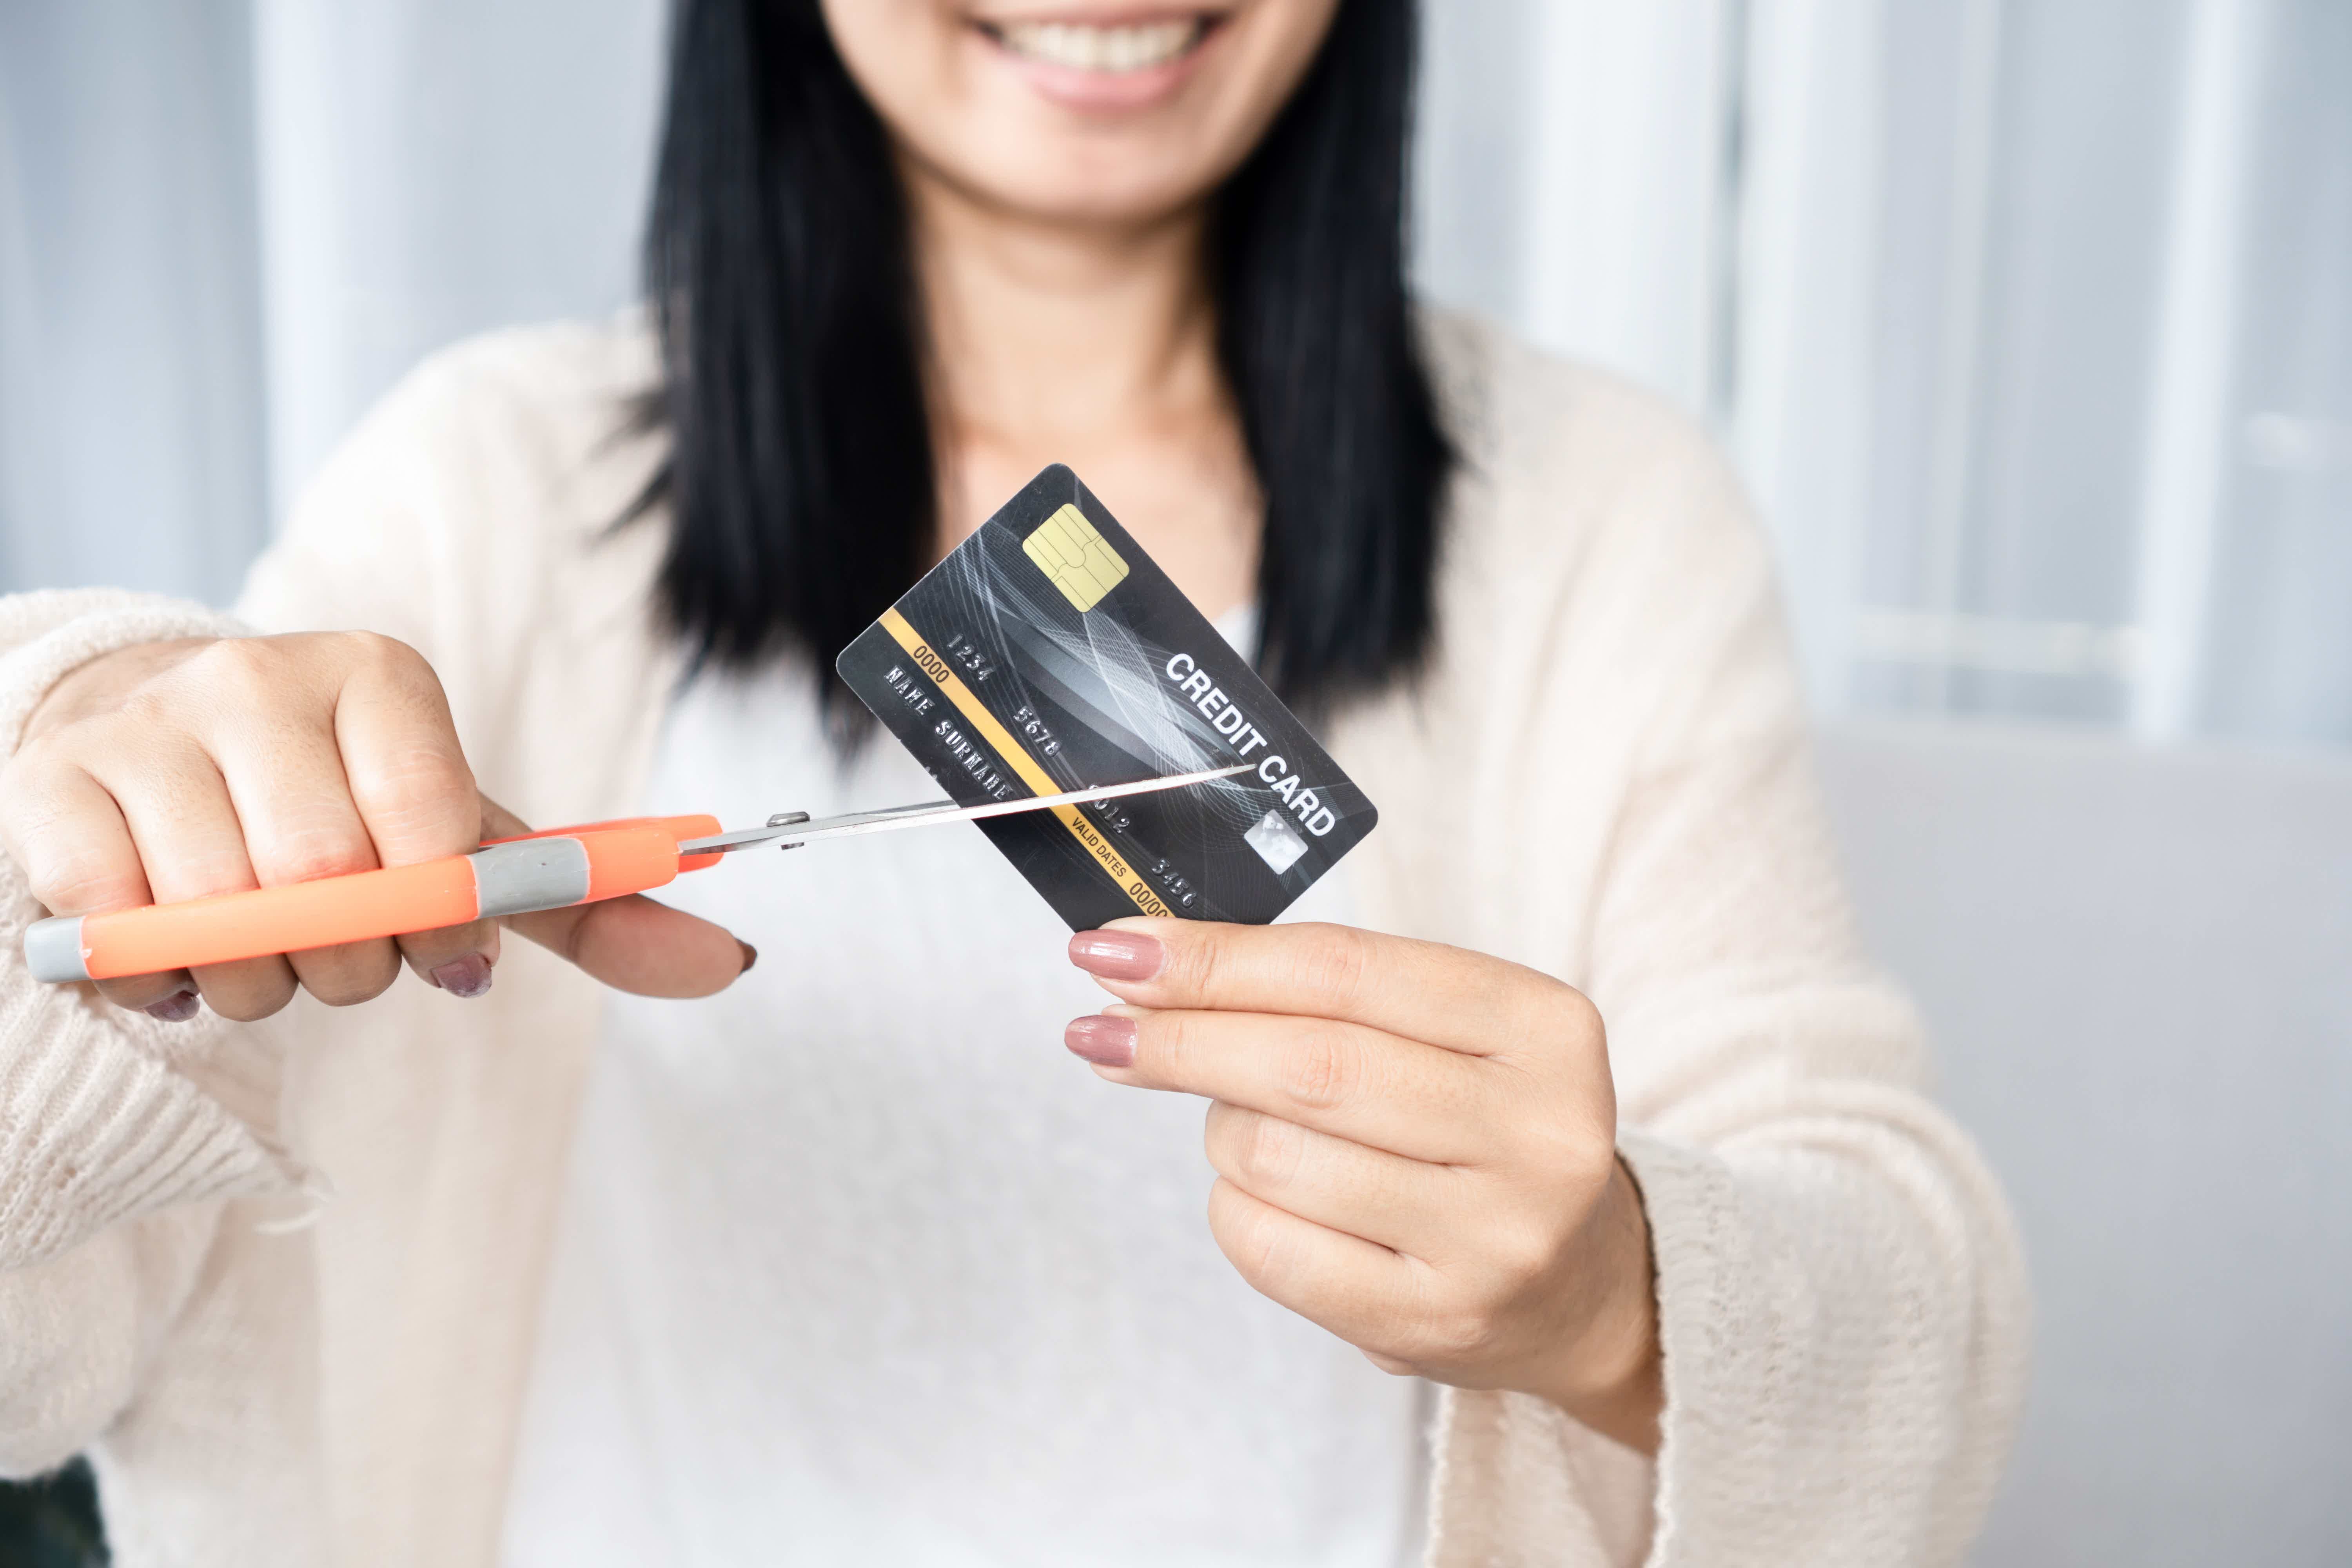 If you think about not using your secured card anymore, read on! Source: Adobe Stock.